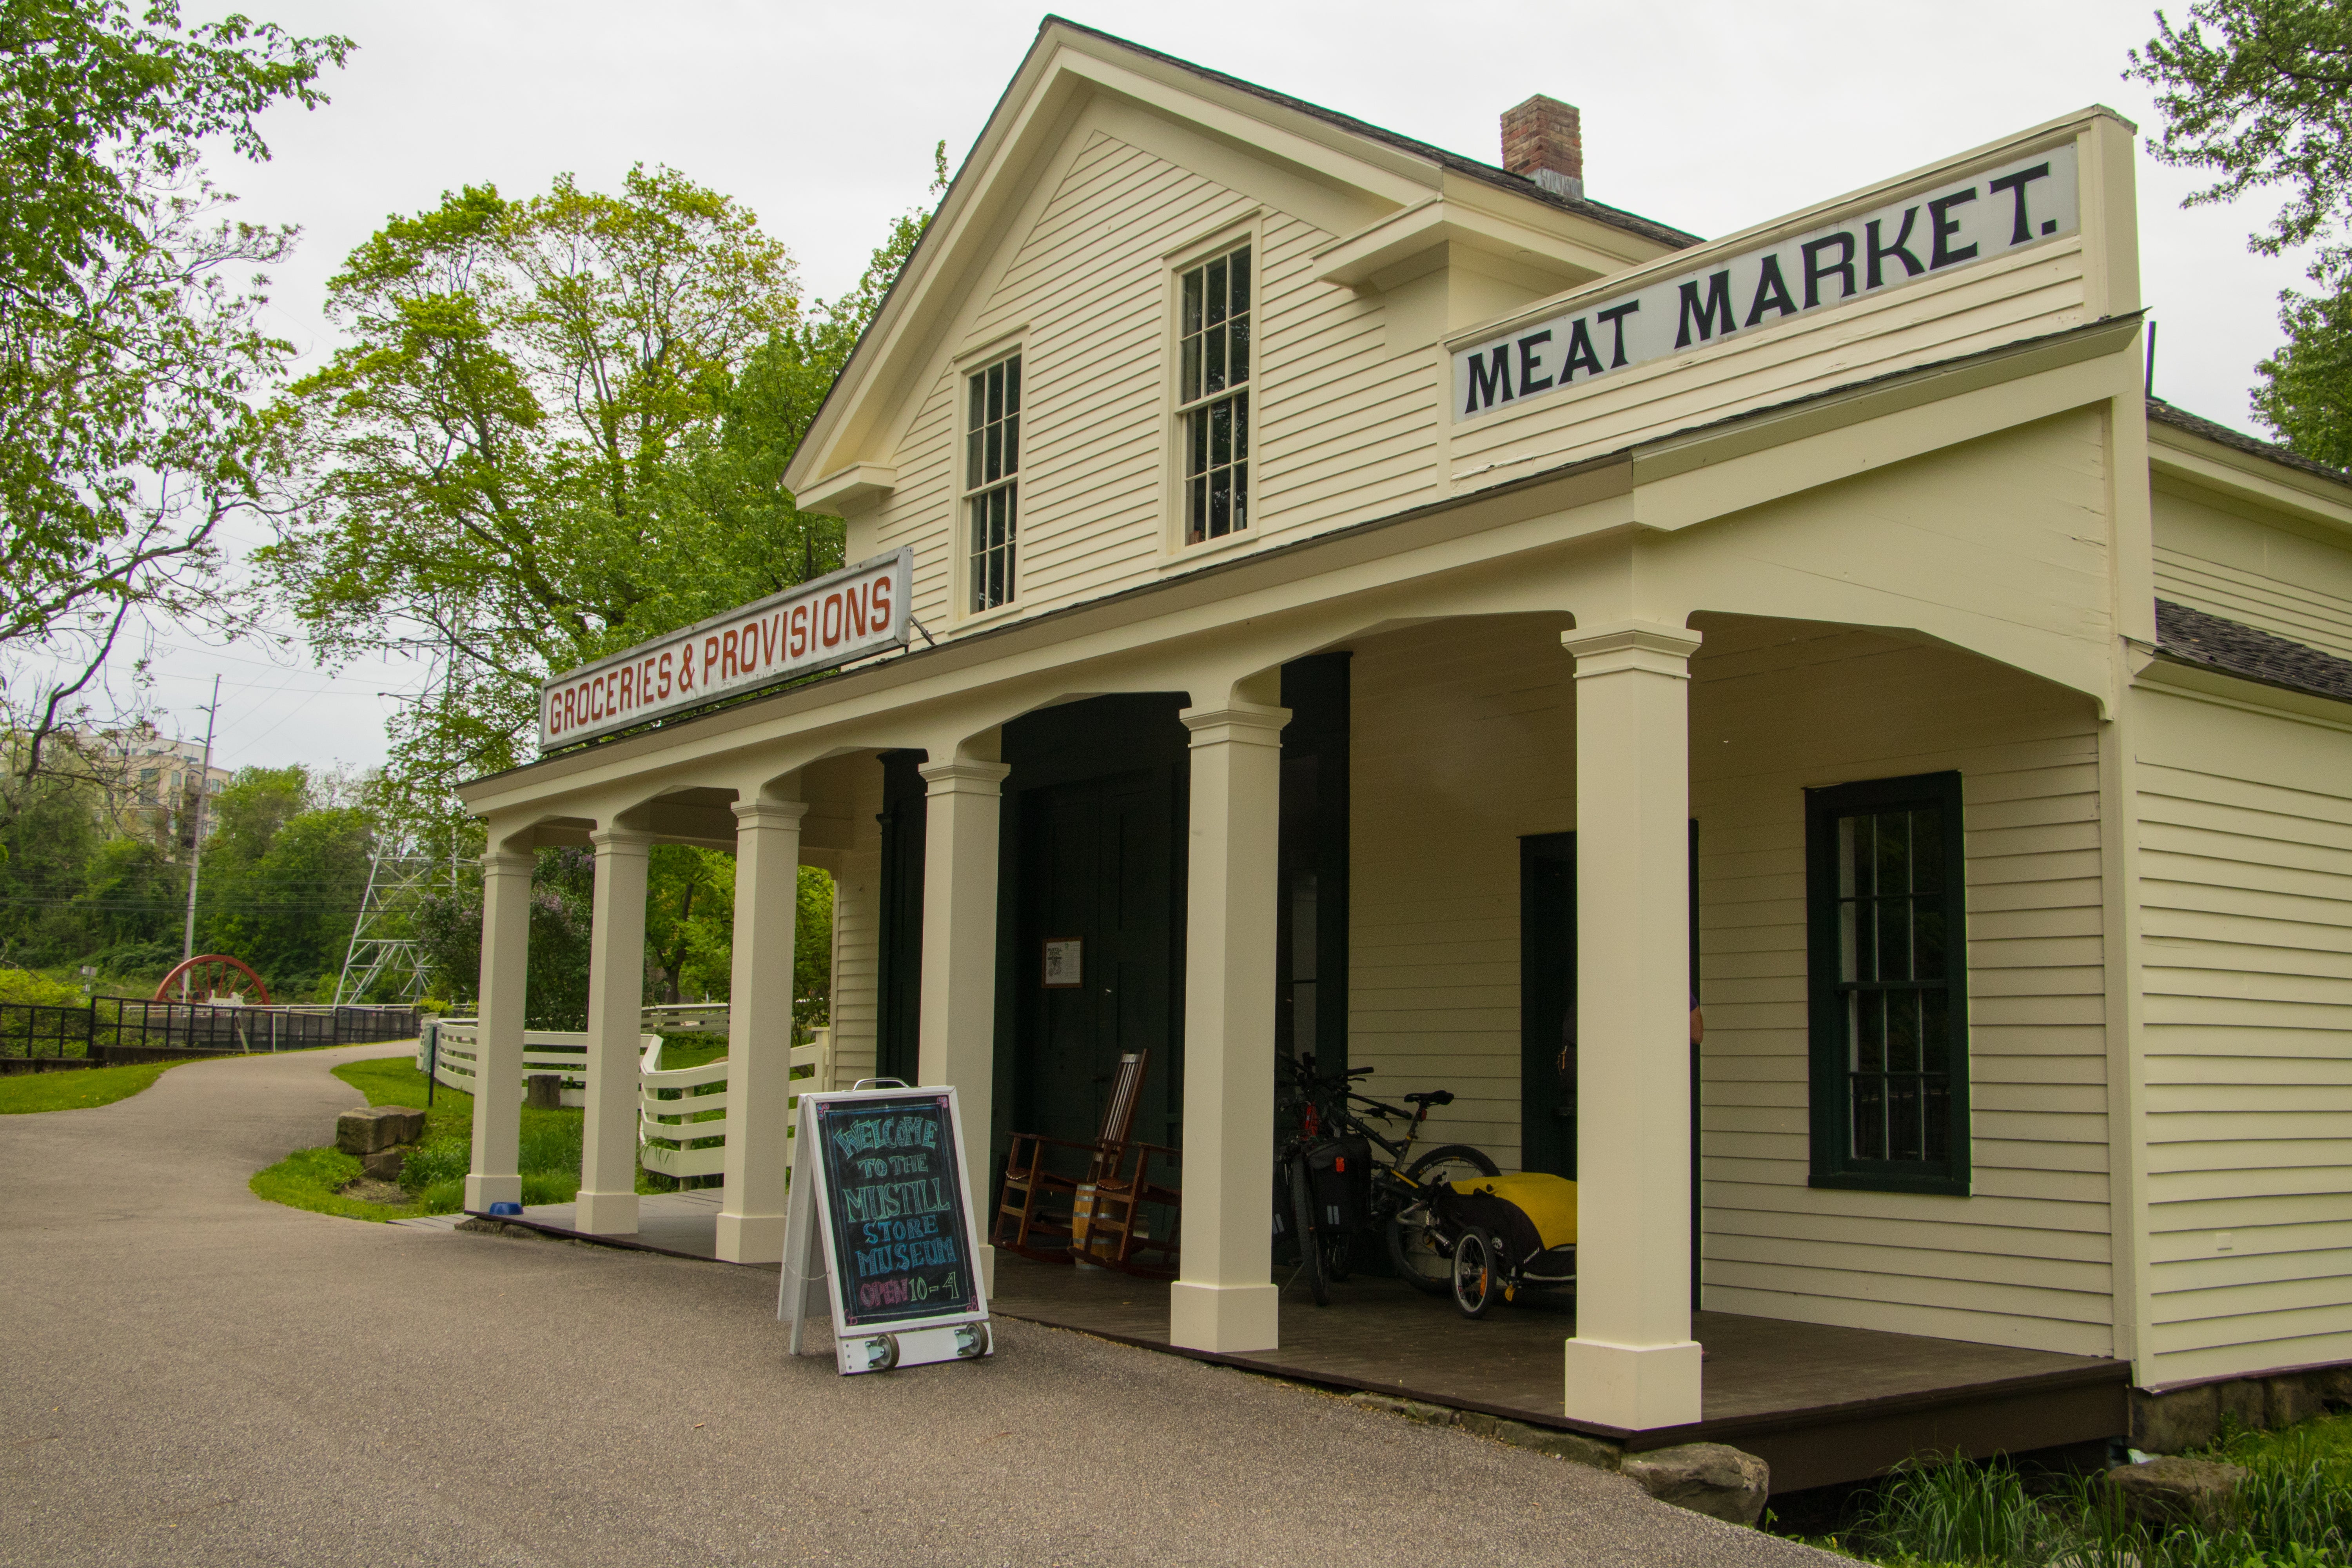 At Lock 15 along the towpath, the historic Mustill Store is worth a stop.